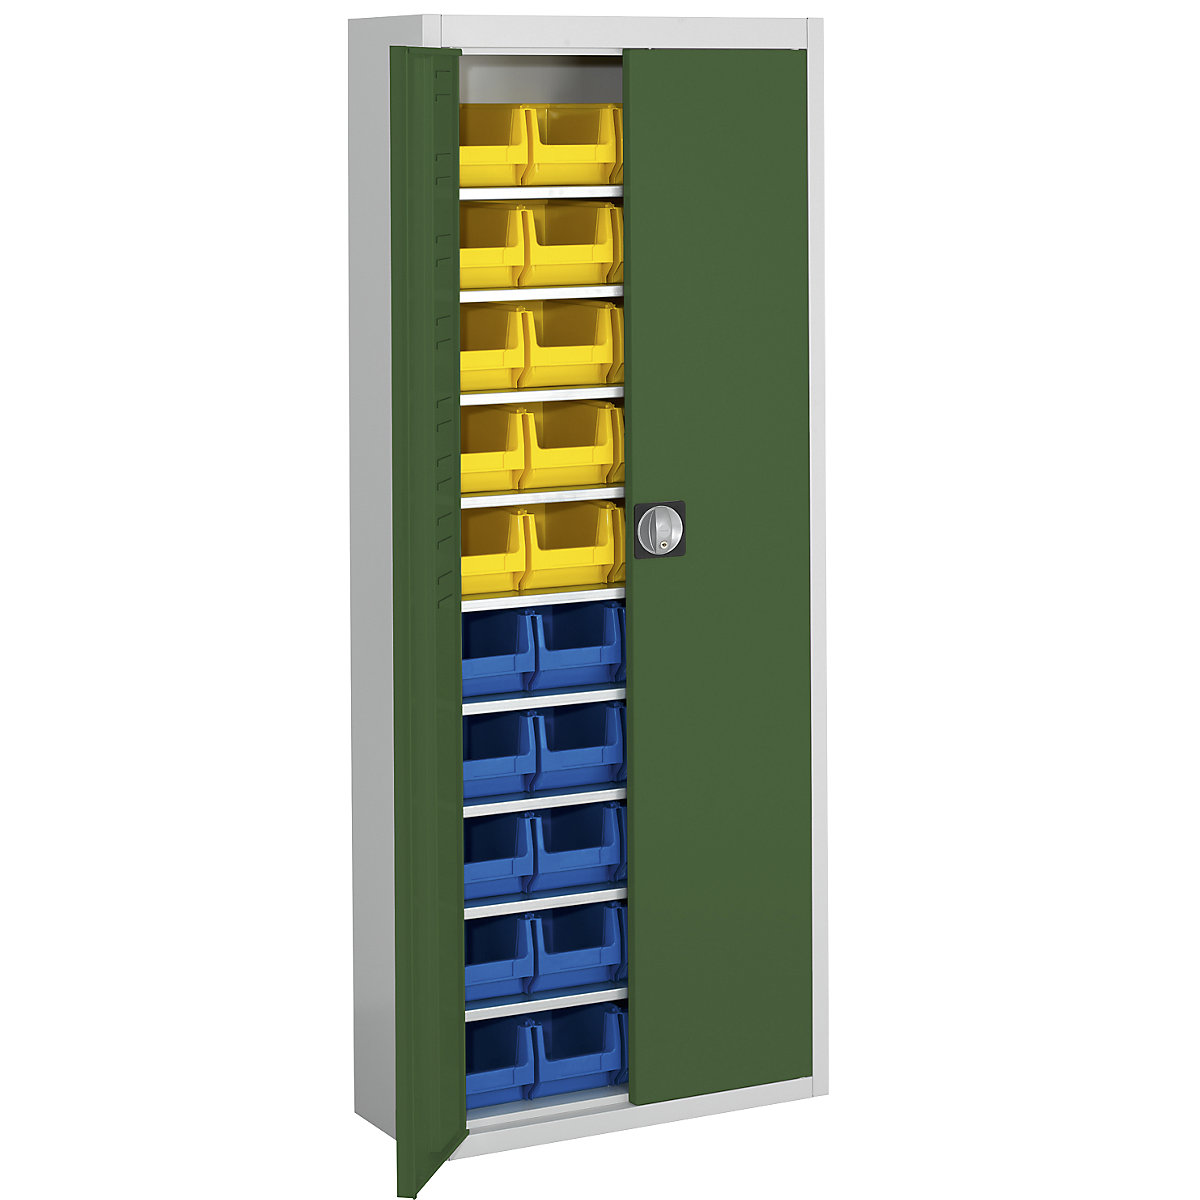 Storage cupboard with open fronted storage bins – mauser, HxWxD 1740 x 680 x 280 mm, two-colour, grey body, green doors, 40 bins-9